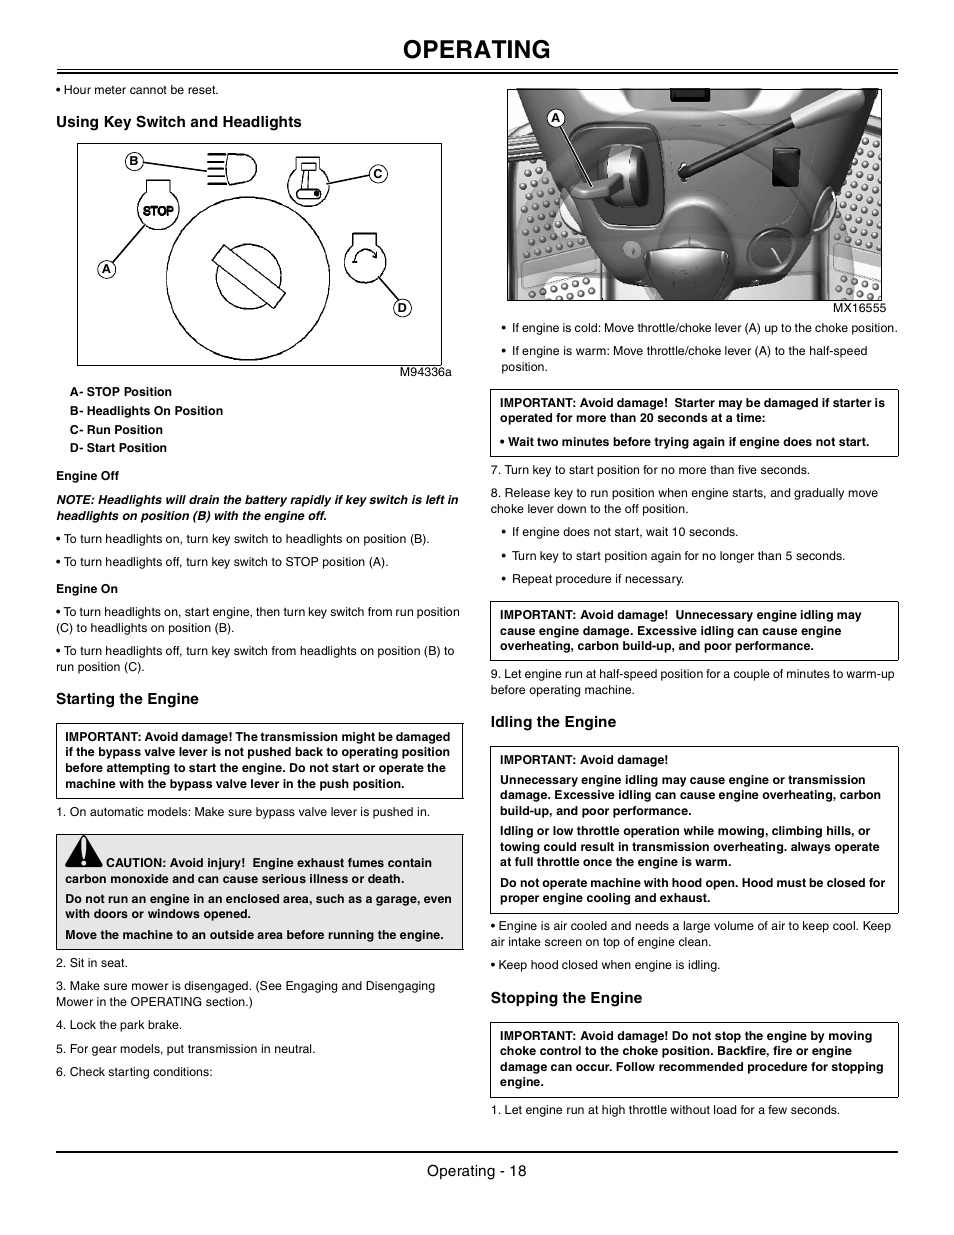 Using key switch and headlights, Engine off, Engine on | Starting the engine, Idling the engine, Stopping the engine, Operating | John Deere la105 User Manual | Page 19 / 52